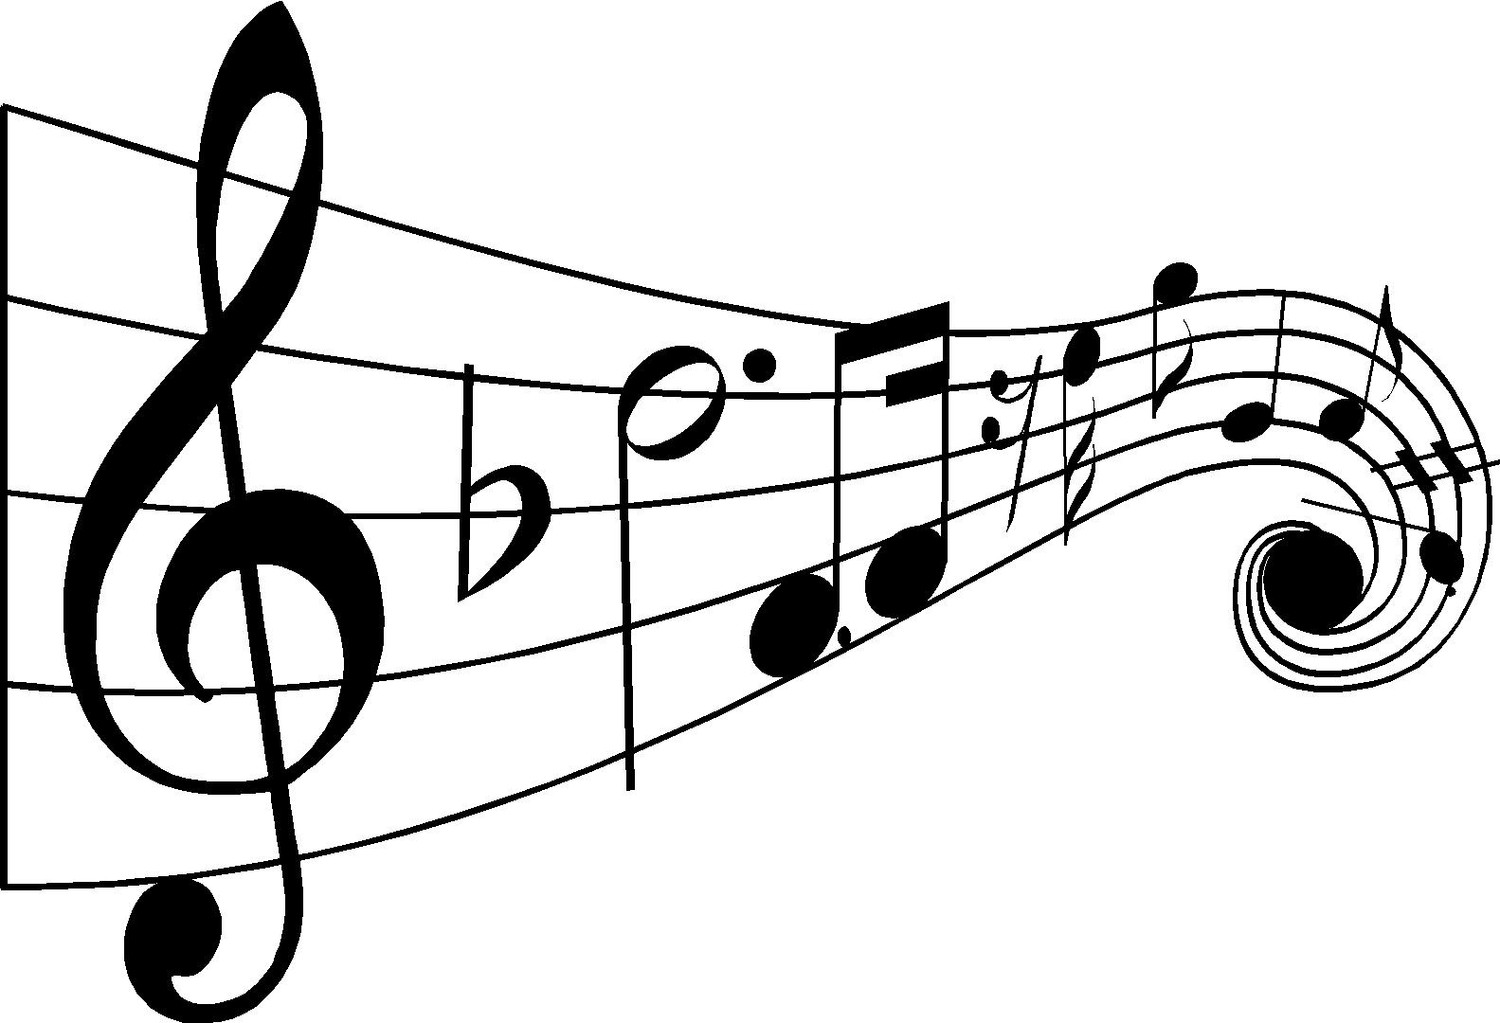 Music Staff Png - ClipArt Best